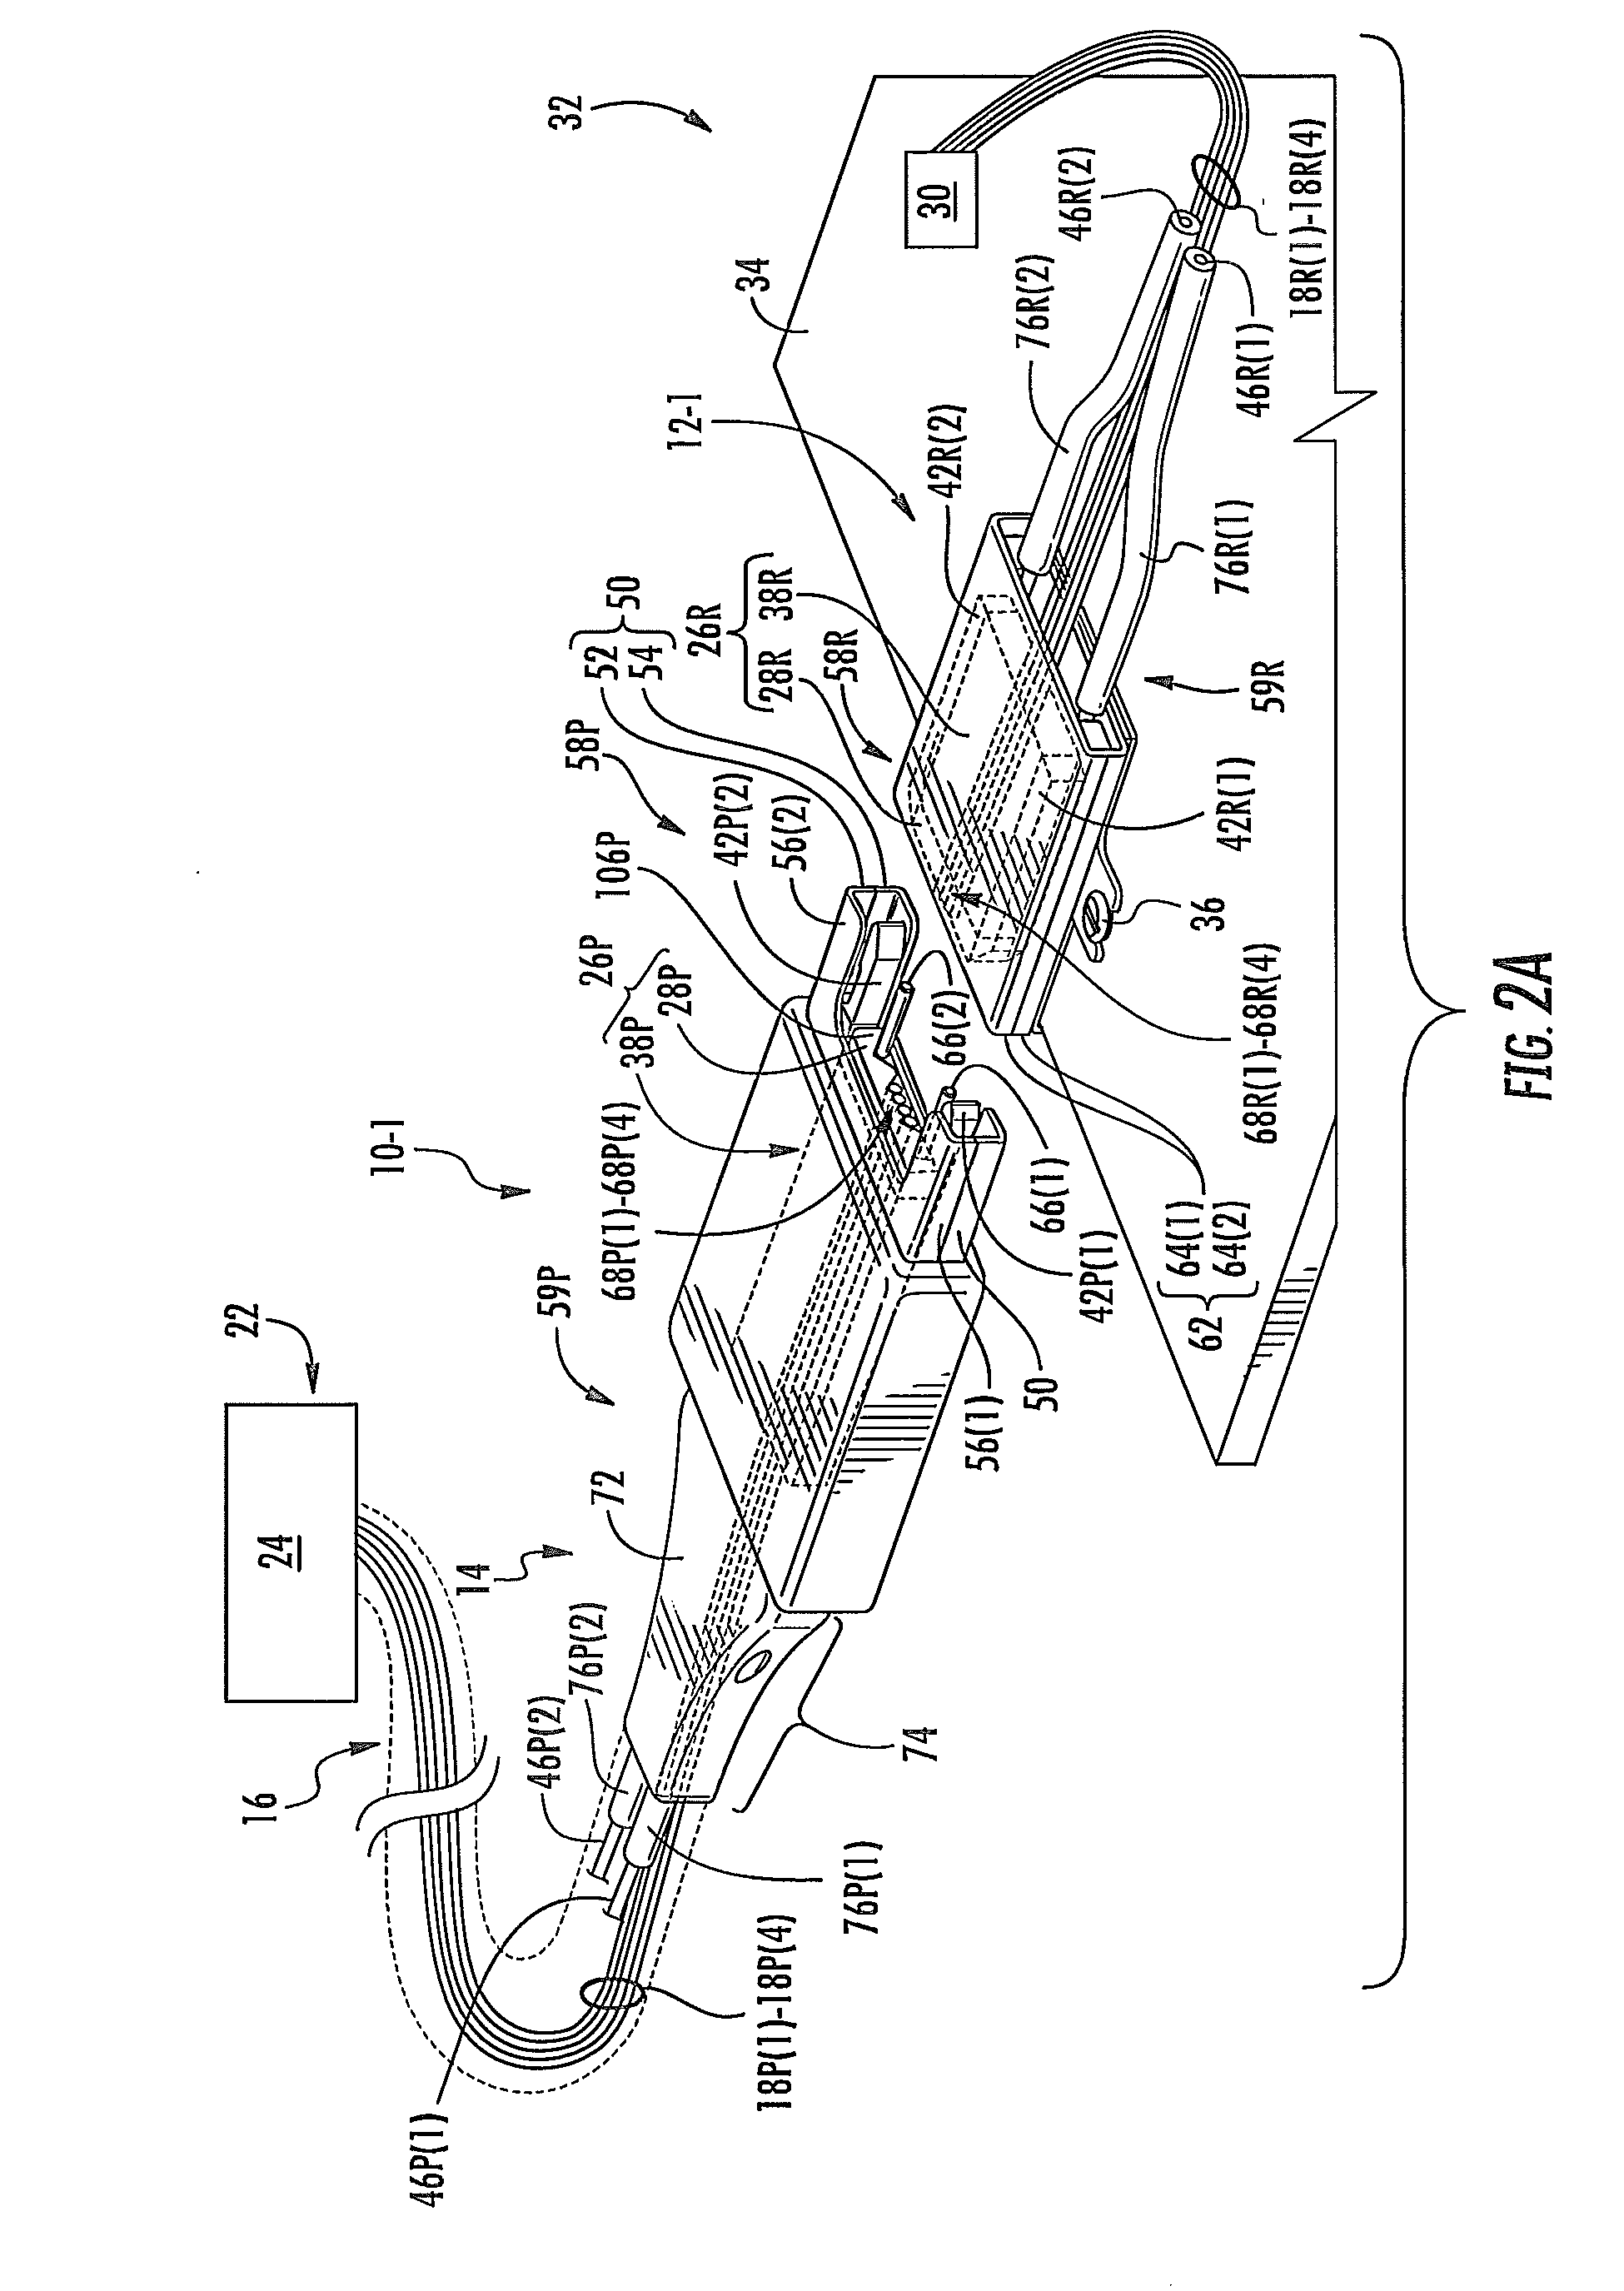 Gradient index (GRIN) lens chips and associated small form factor optical arrays for optical connections, related fiber optic connectors